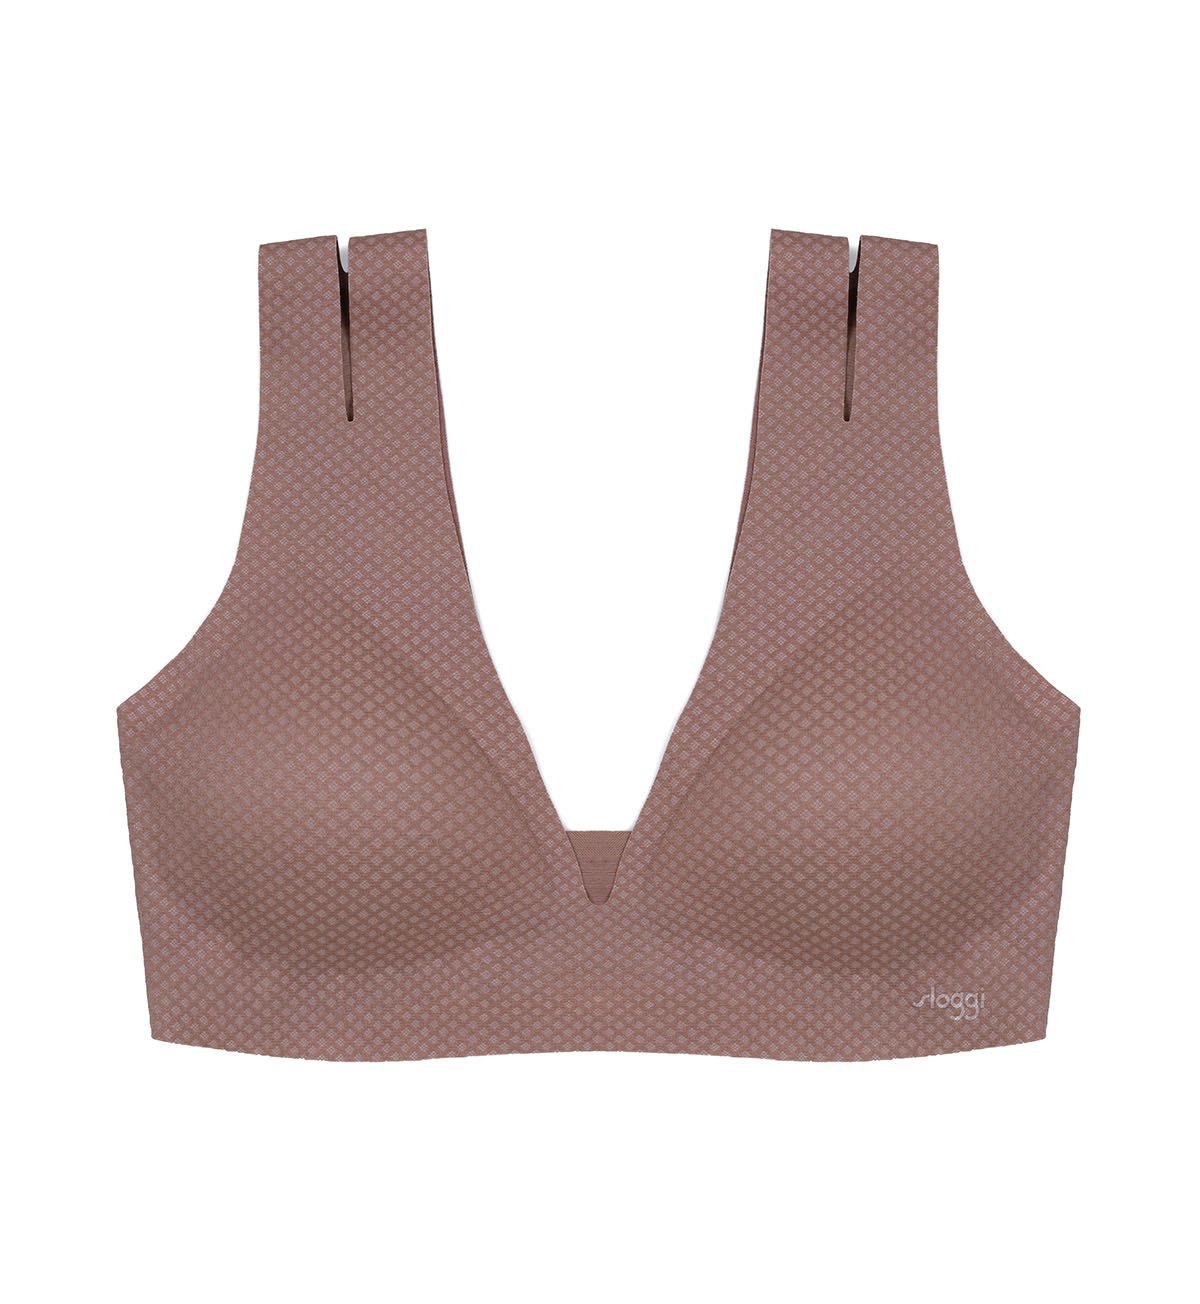 🔥LAST DAY 50% OFF🔥- Adhesive invisible Lifting Bra